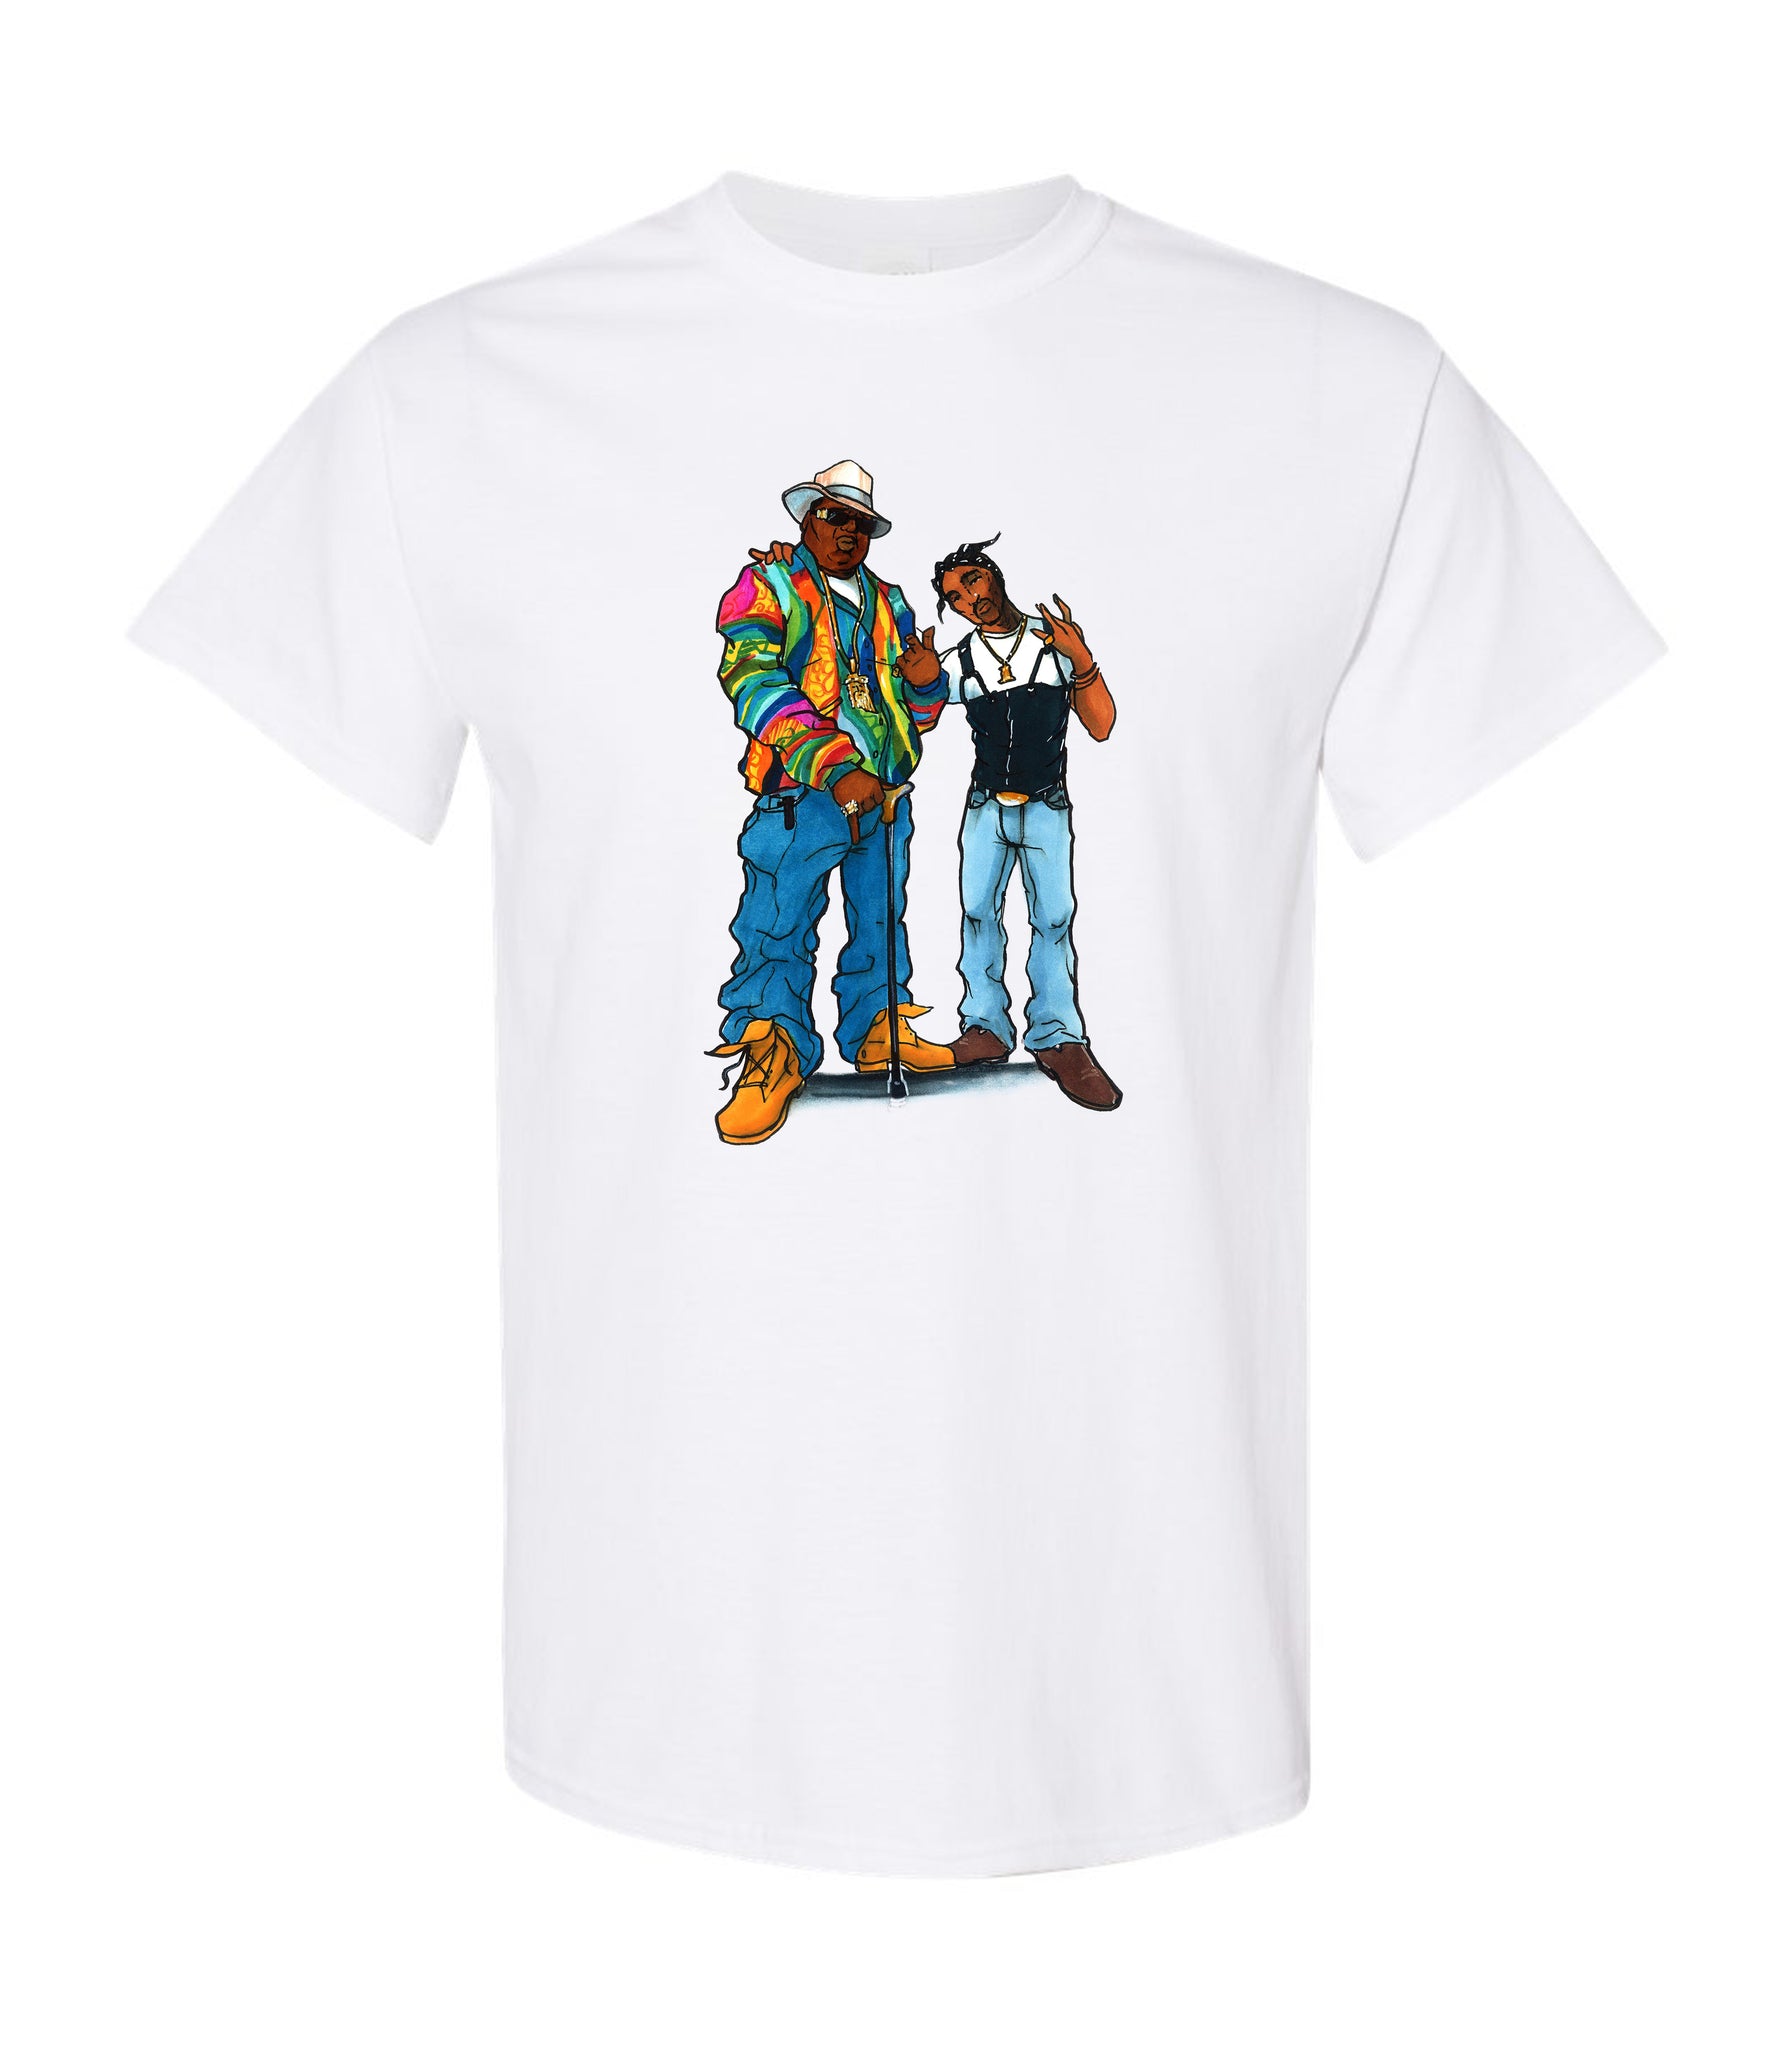 Peace Over Beef Notorious B.I.G & 2 Pac T-shirt S/S 2022